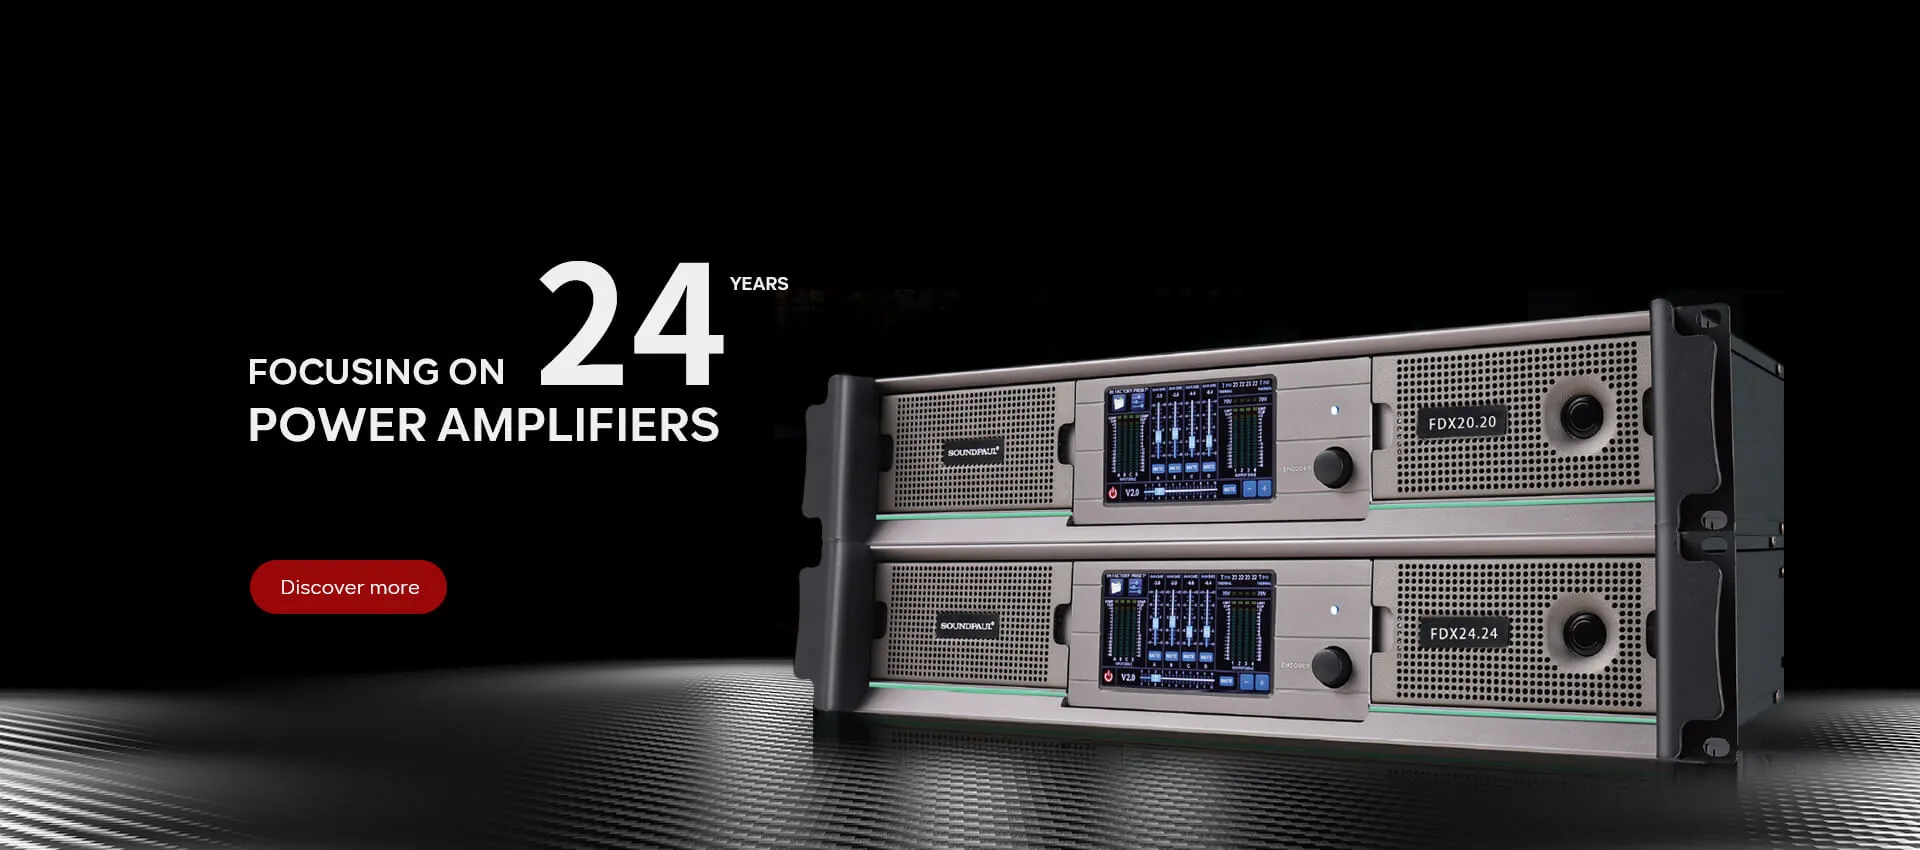 Focus on power amplifier for 24 years